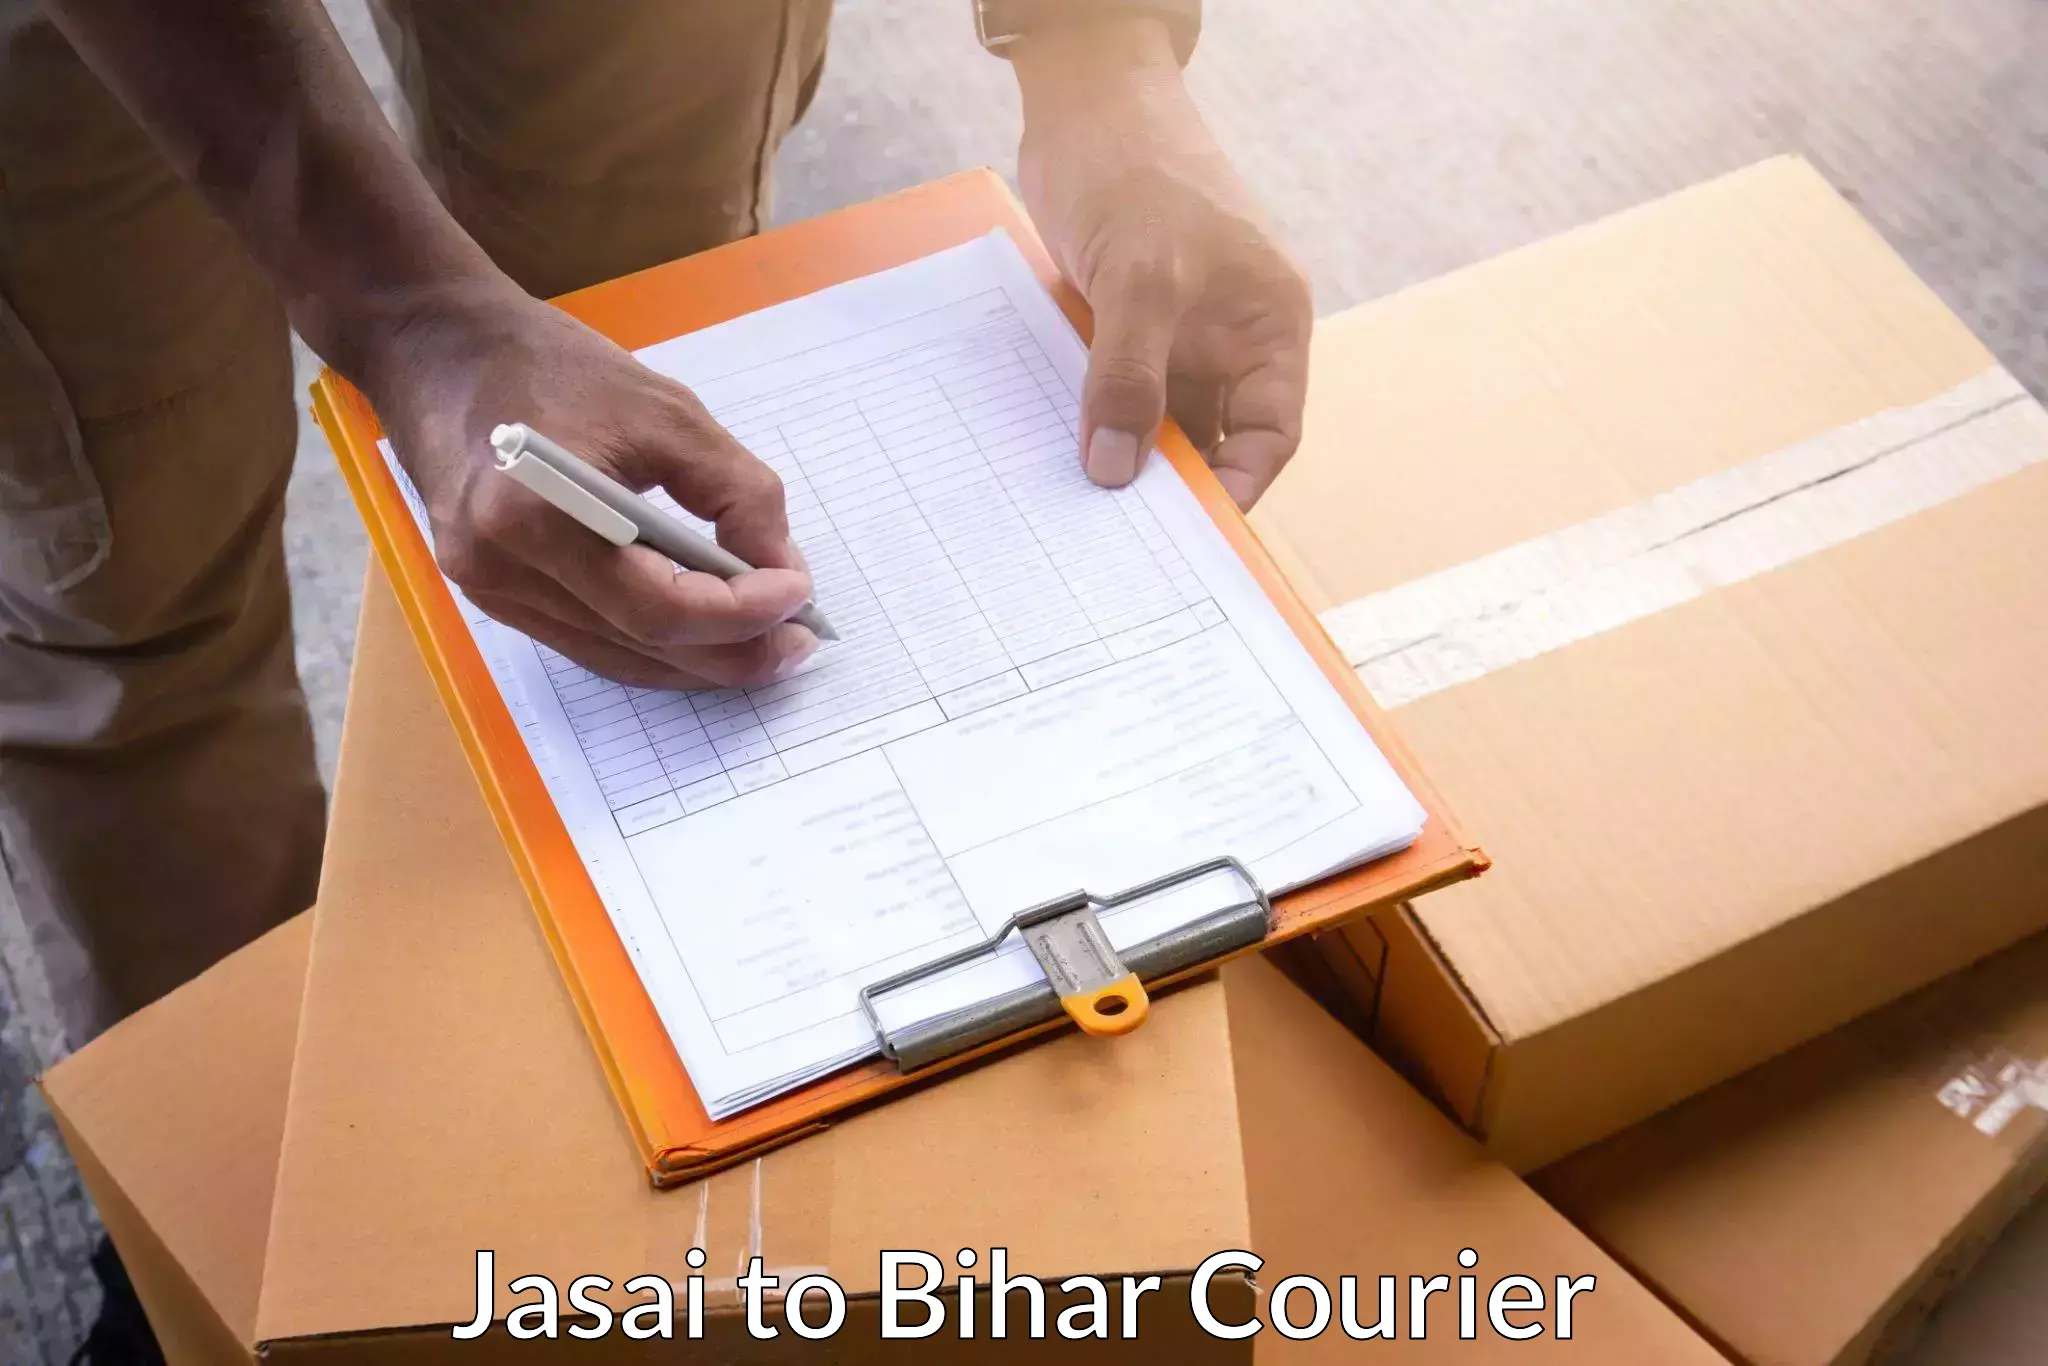 Next-day delivery options Jasai to Deo Aurangabad